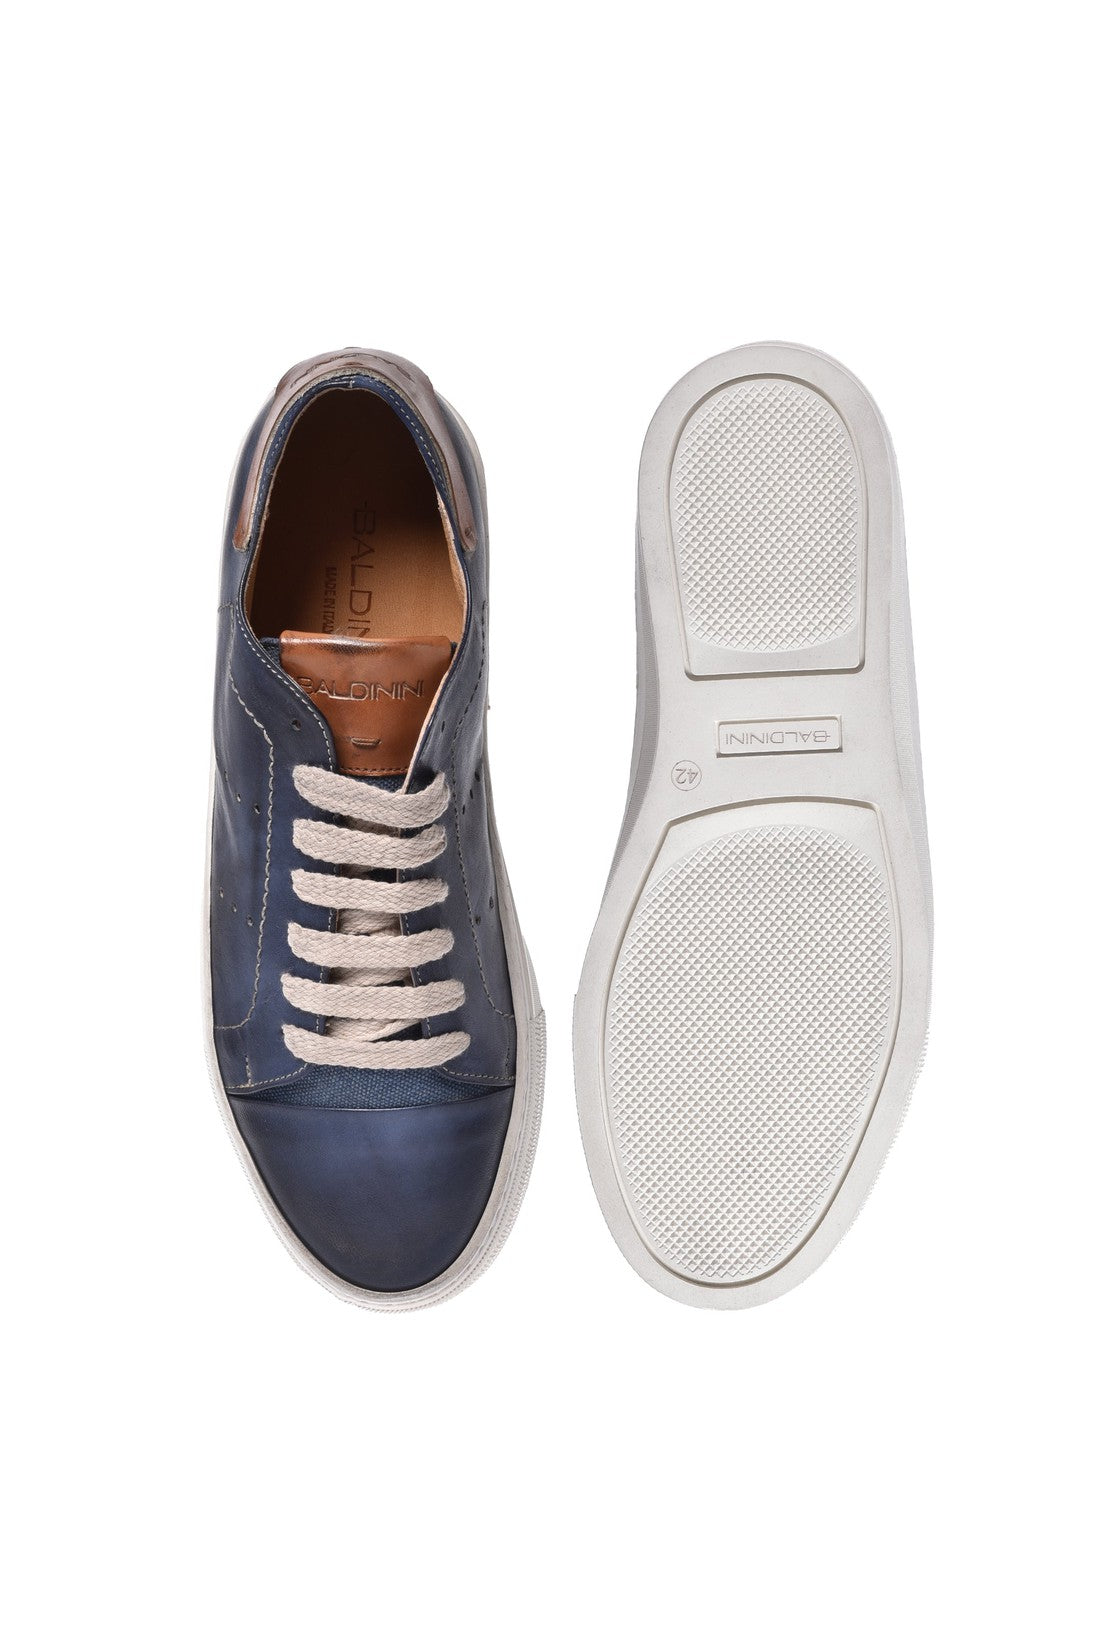 Sneaker in blue calfskin and canvas